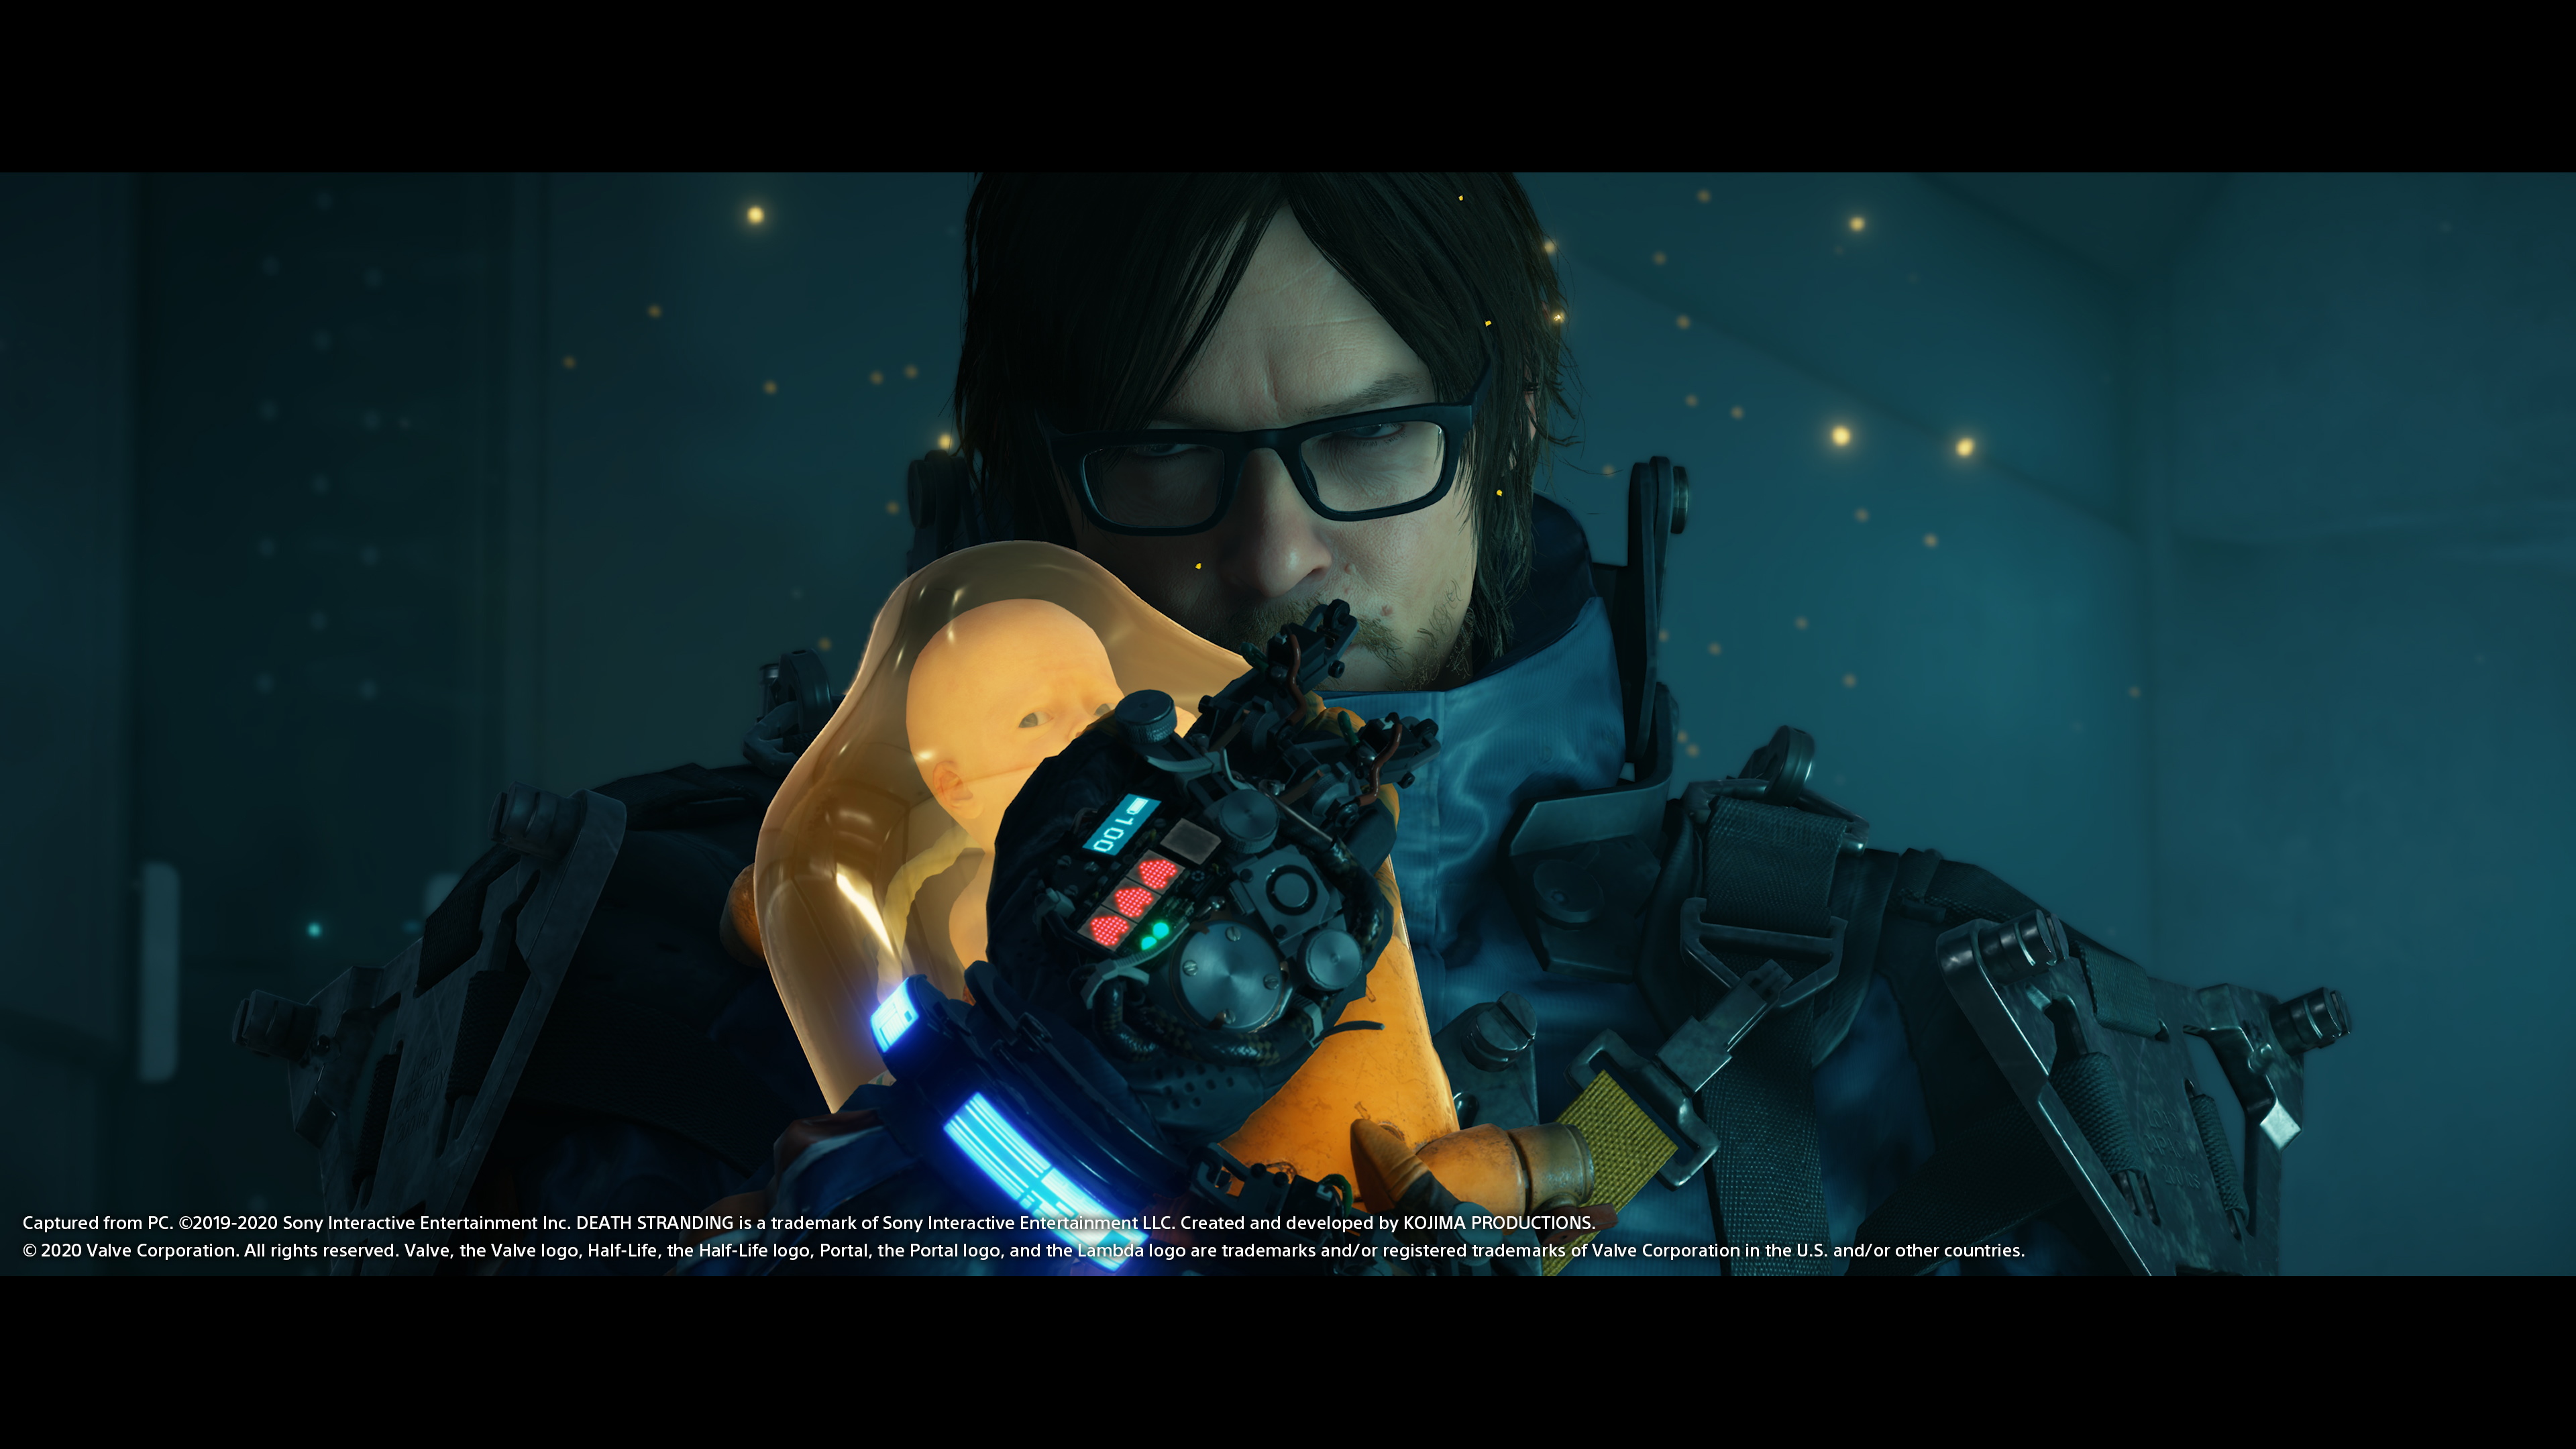 New Death Stranding trailer features Troy Baker as a masked menace